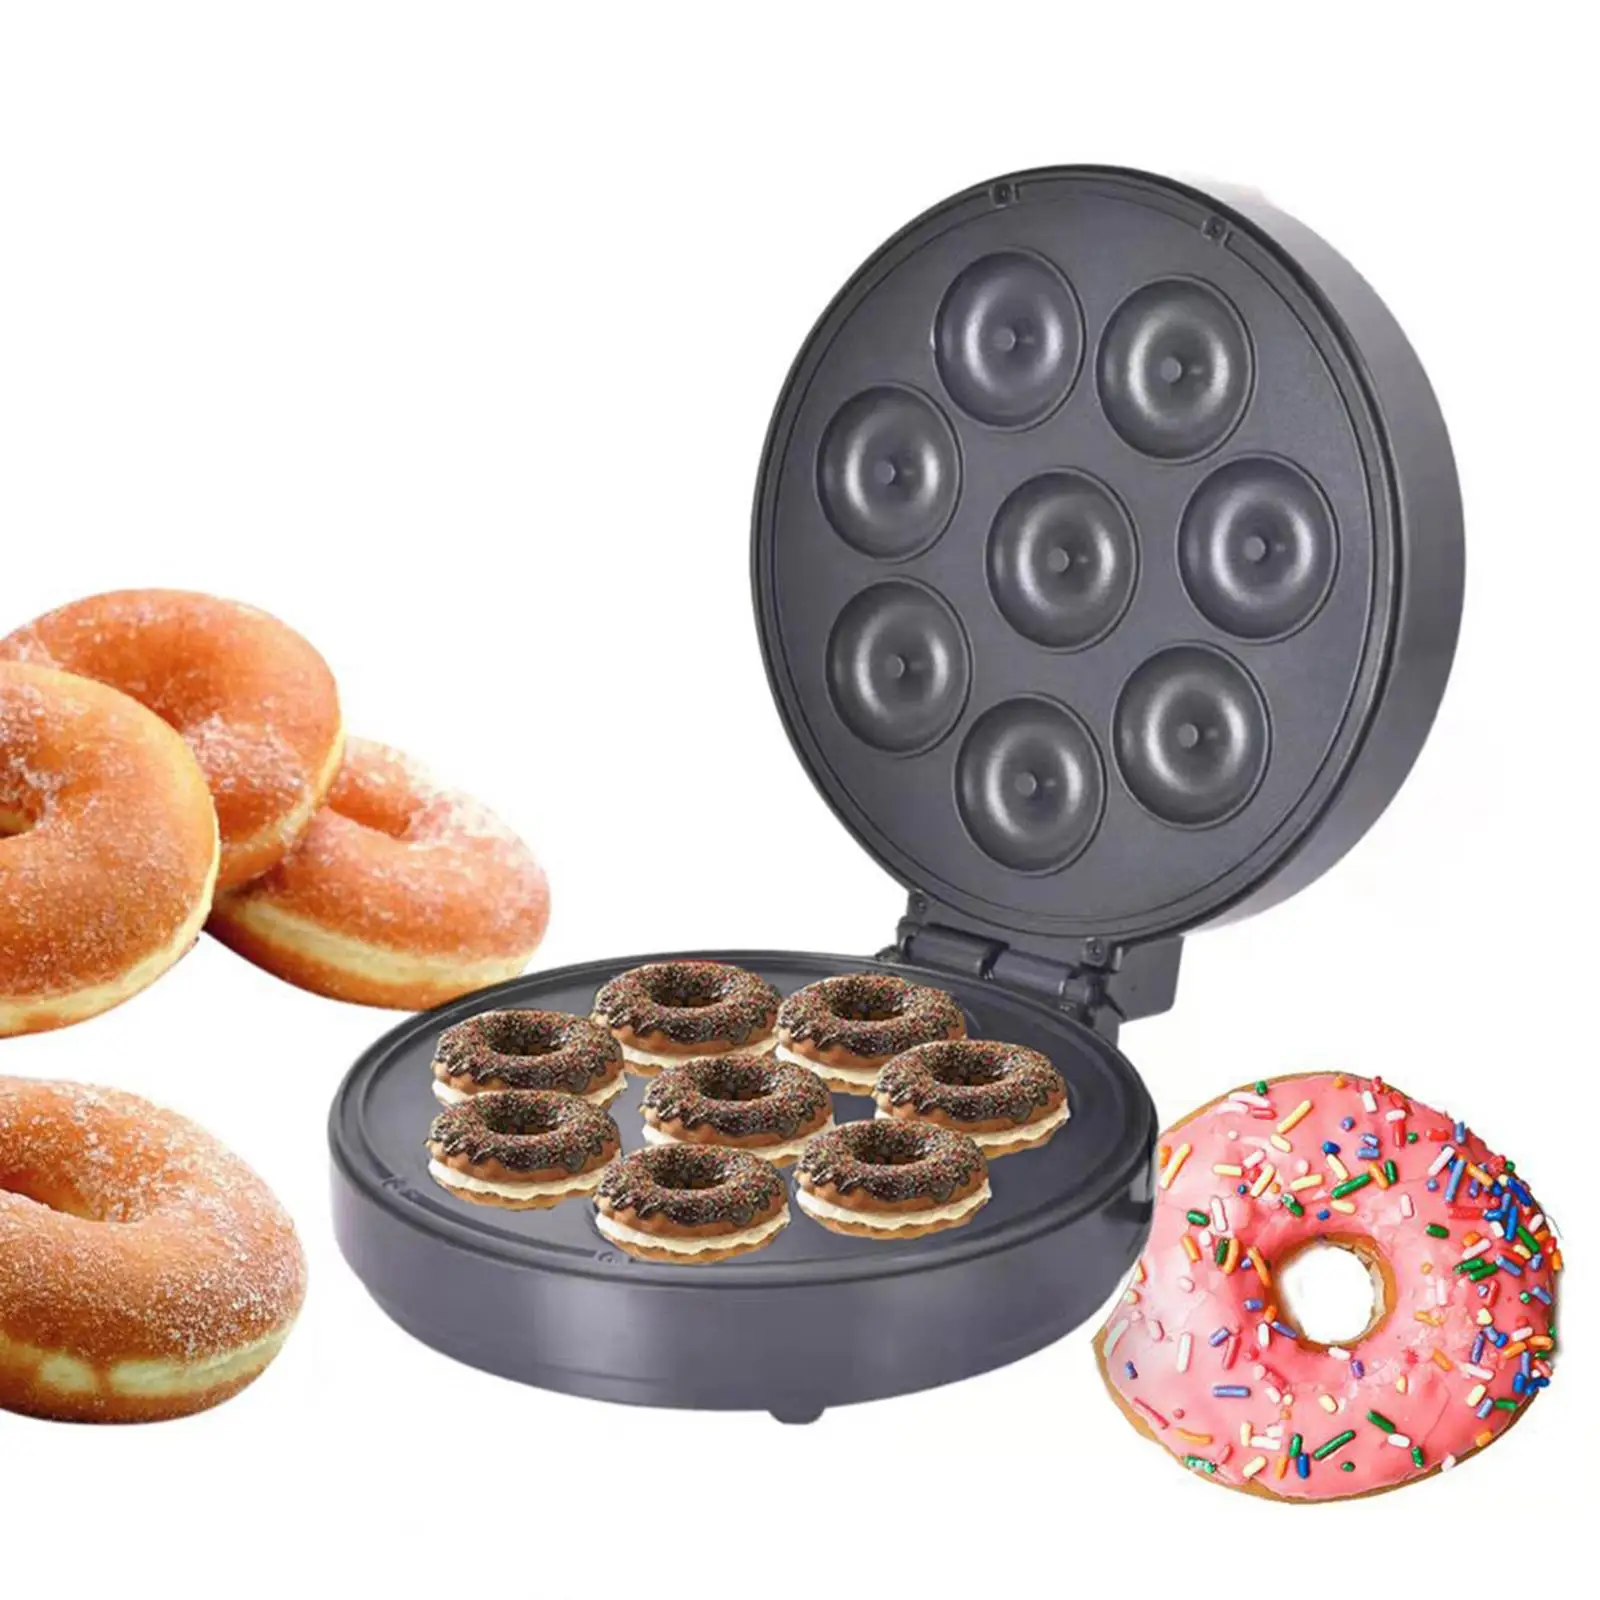 Donut Maker Machine Snack with Indicator Light Easy to Clean Waffle Doughnut Machine for Home